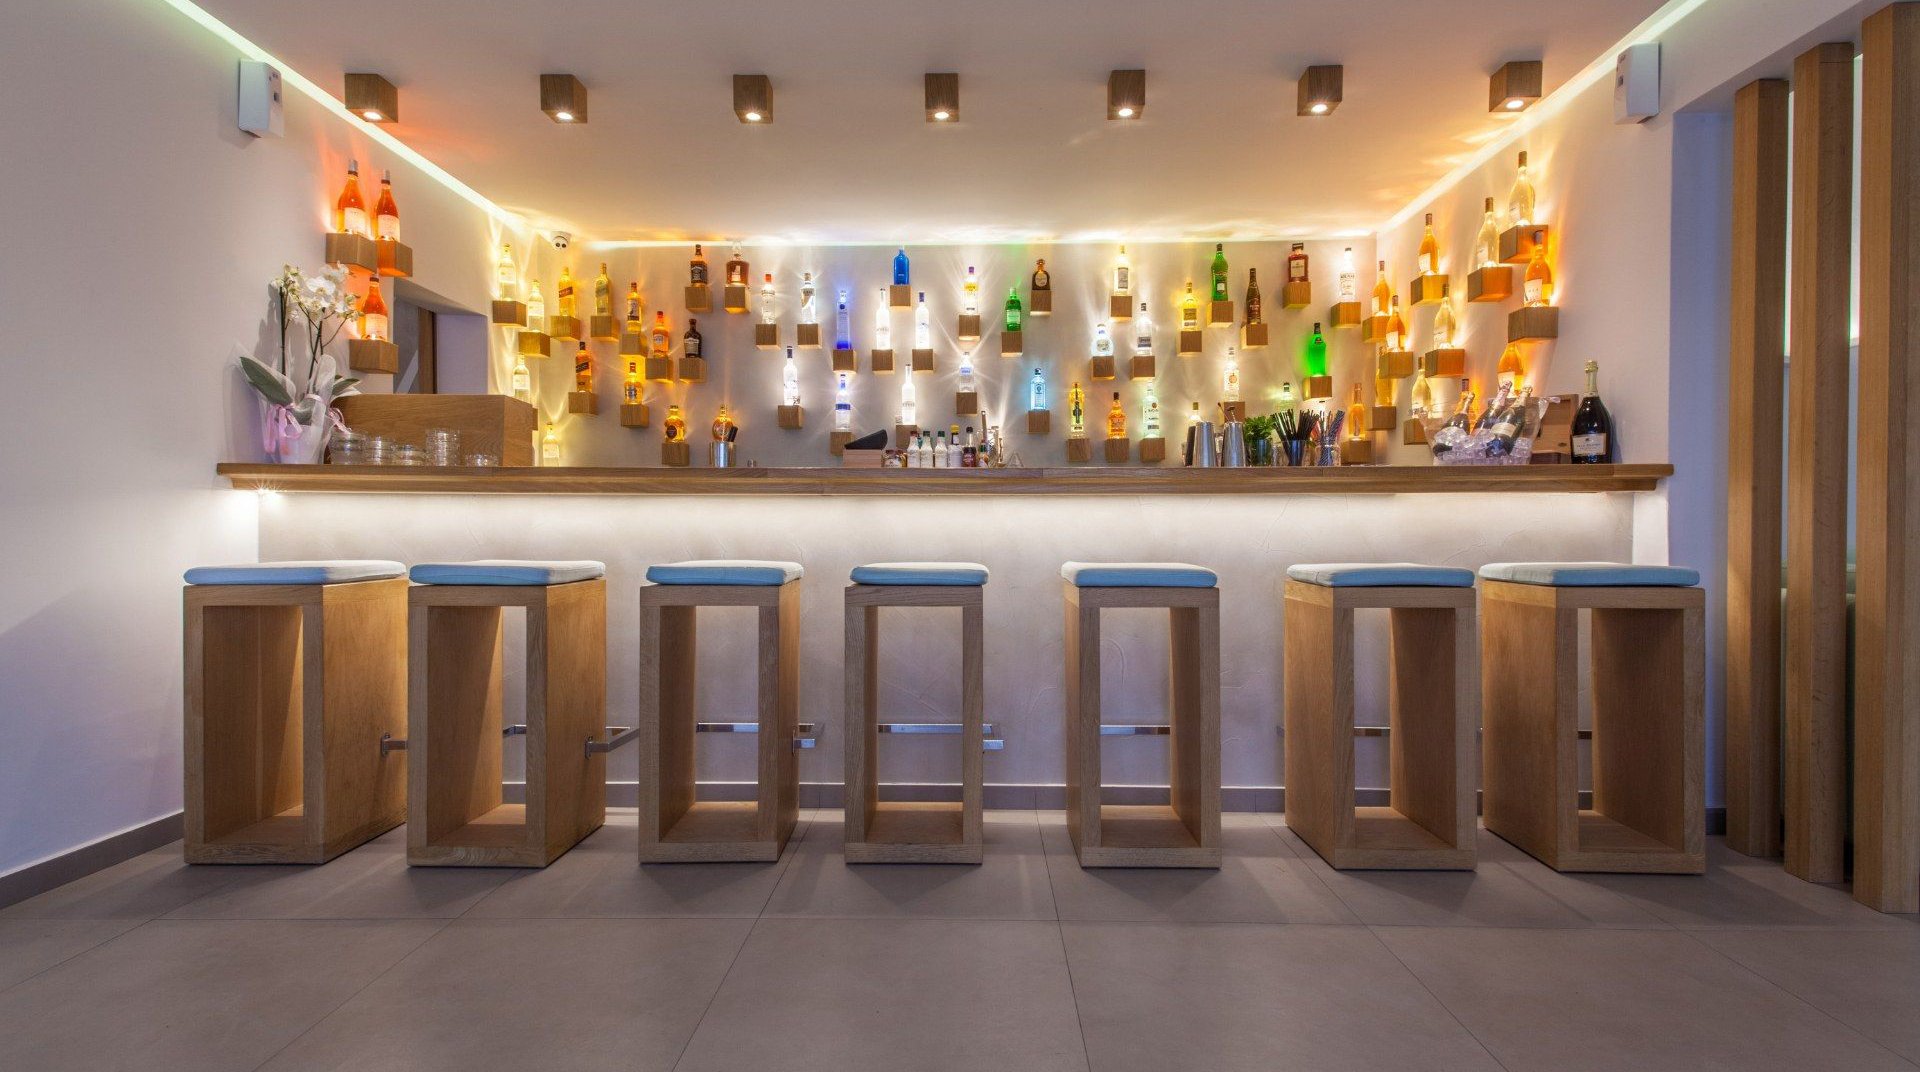 The bar of the resort, with the drinks and the chairs